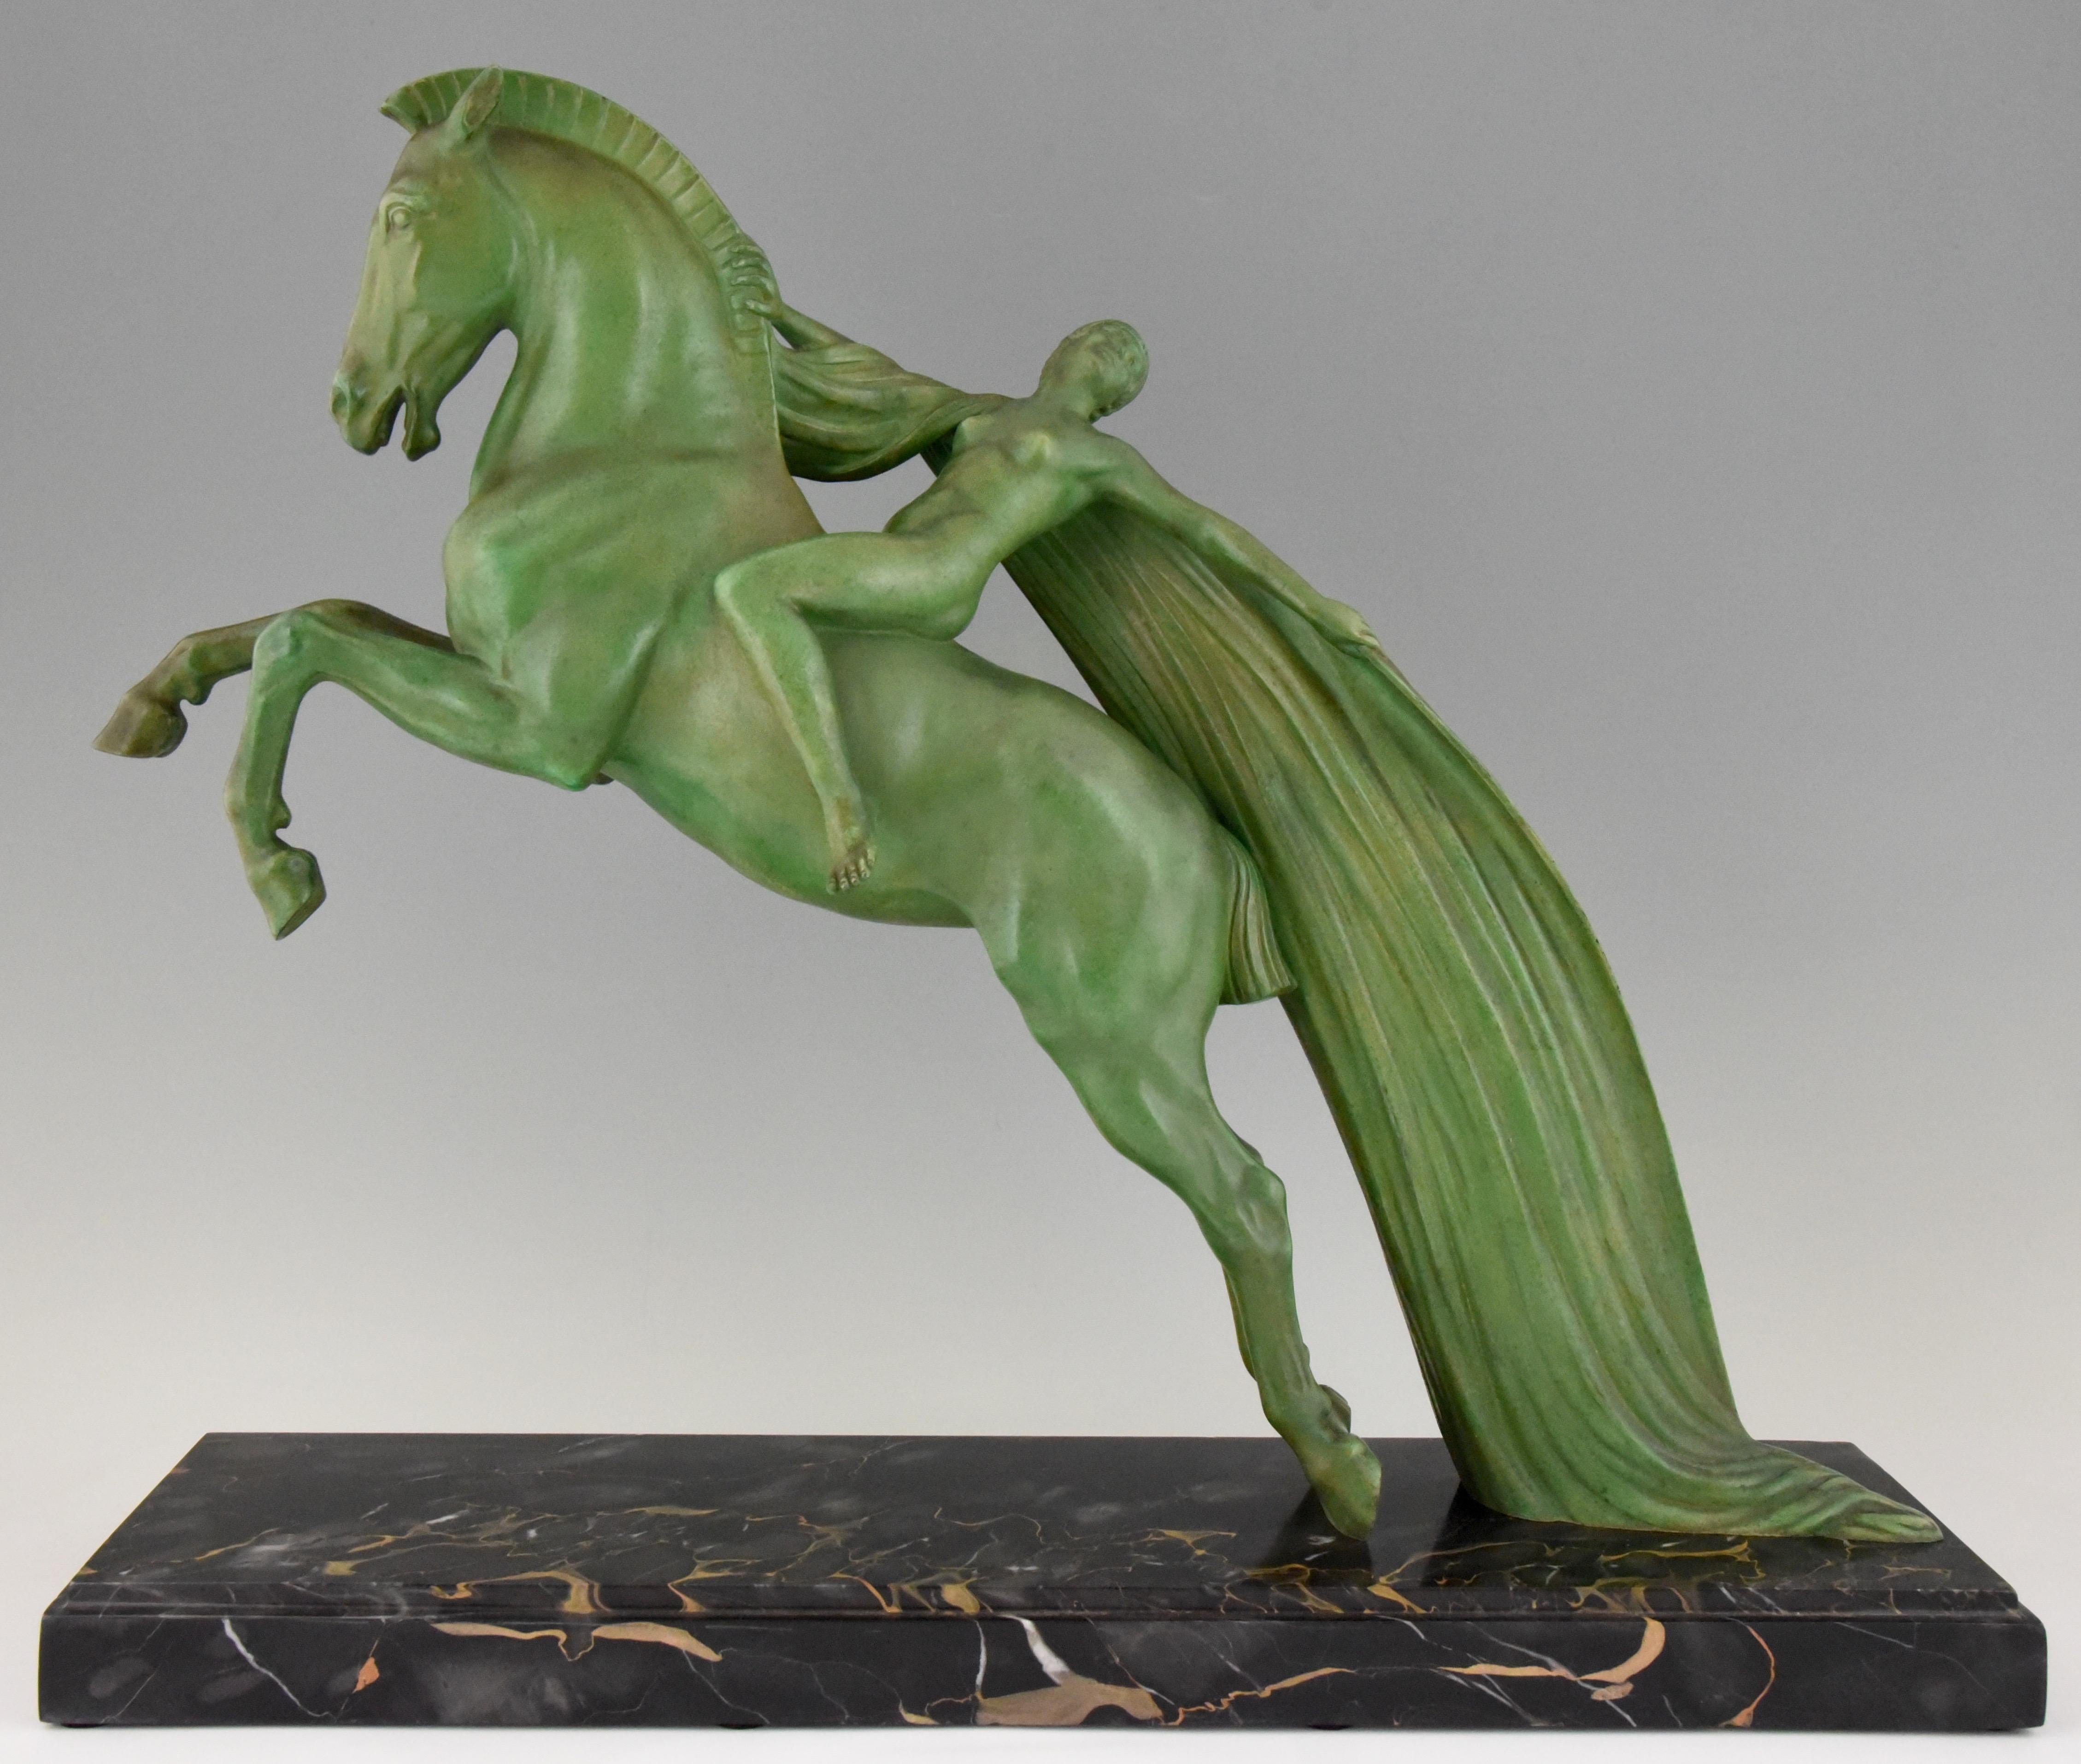 Spectacular large Art Deco sculpture of a nude on a rearing horse by the French artist Charles Charles, circa 1930. Lovely green patina, Portor marble base.